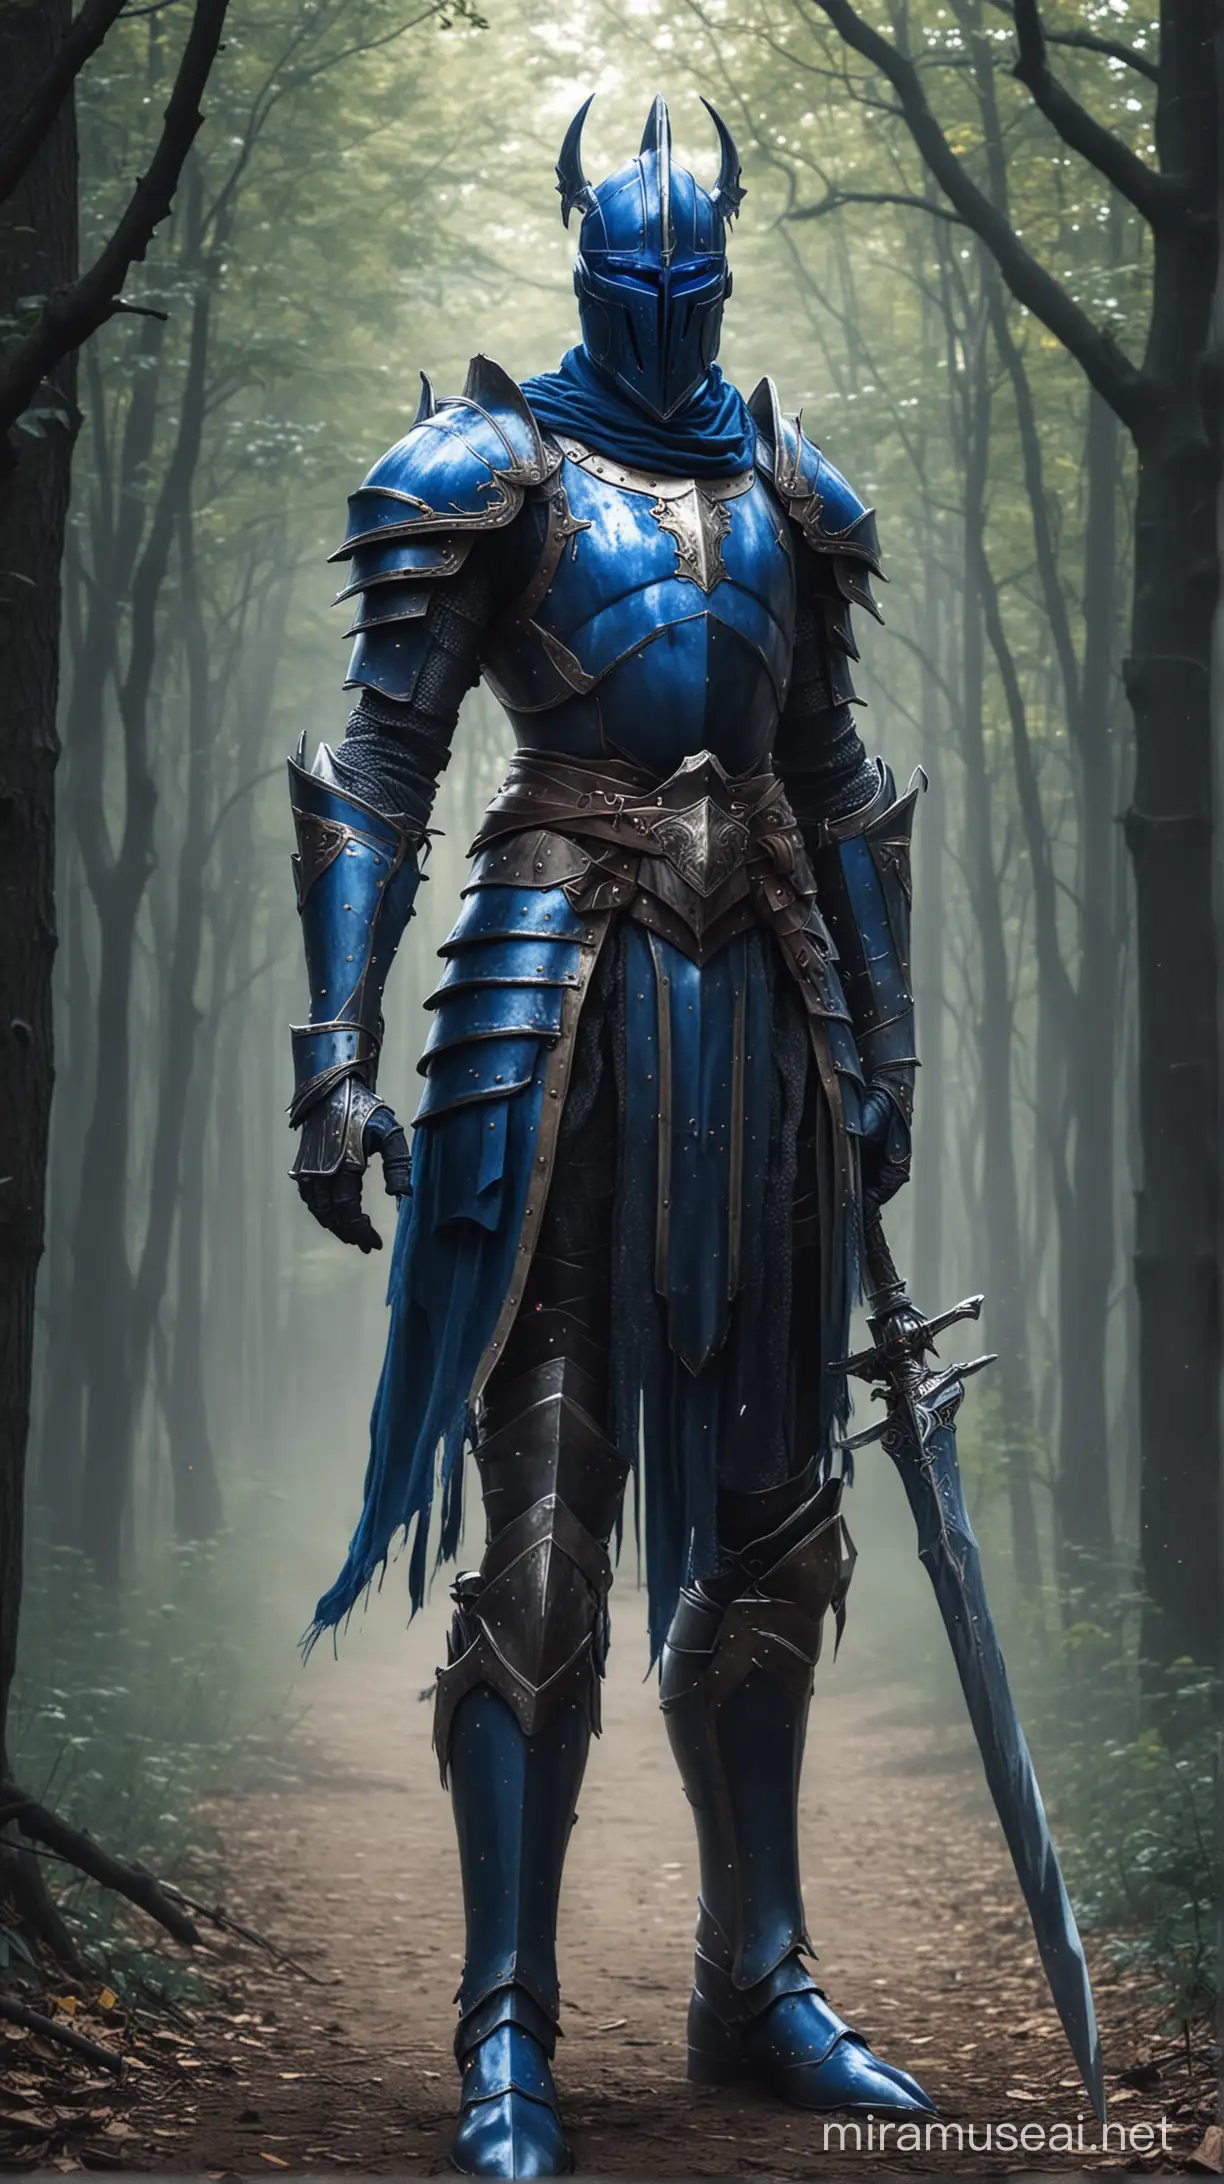 Majestic Blue Knight in Mystical Forest Setting